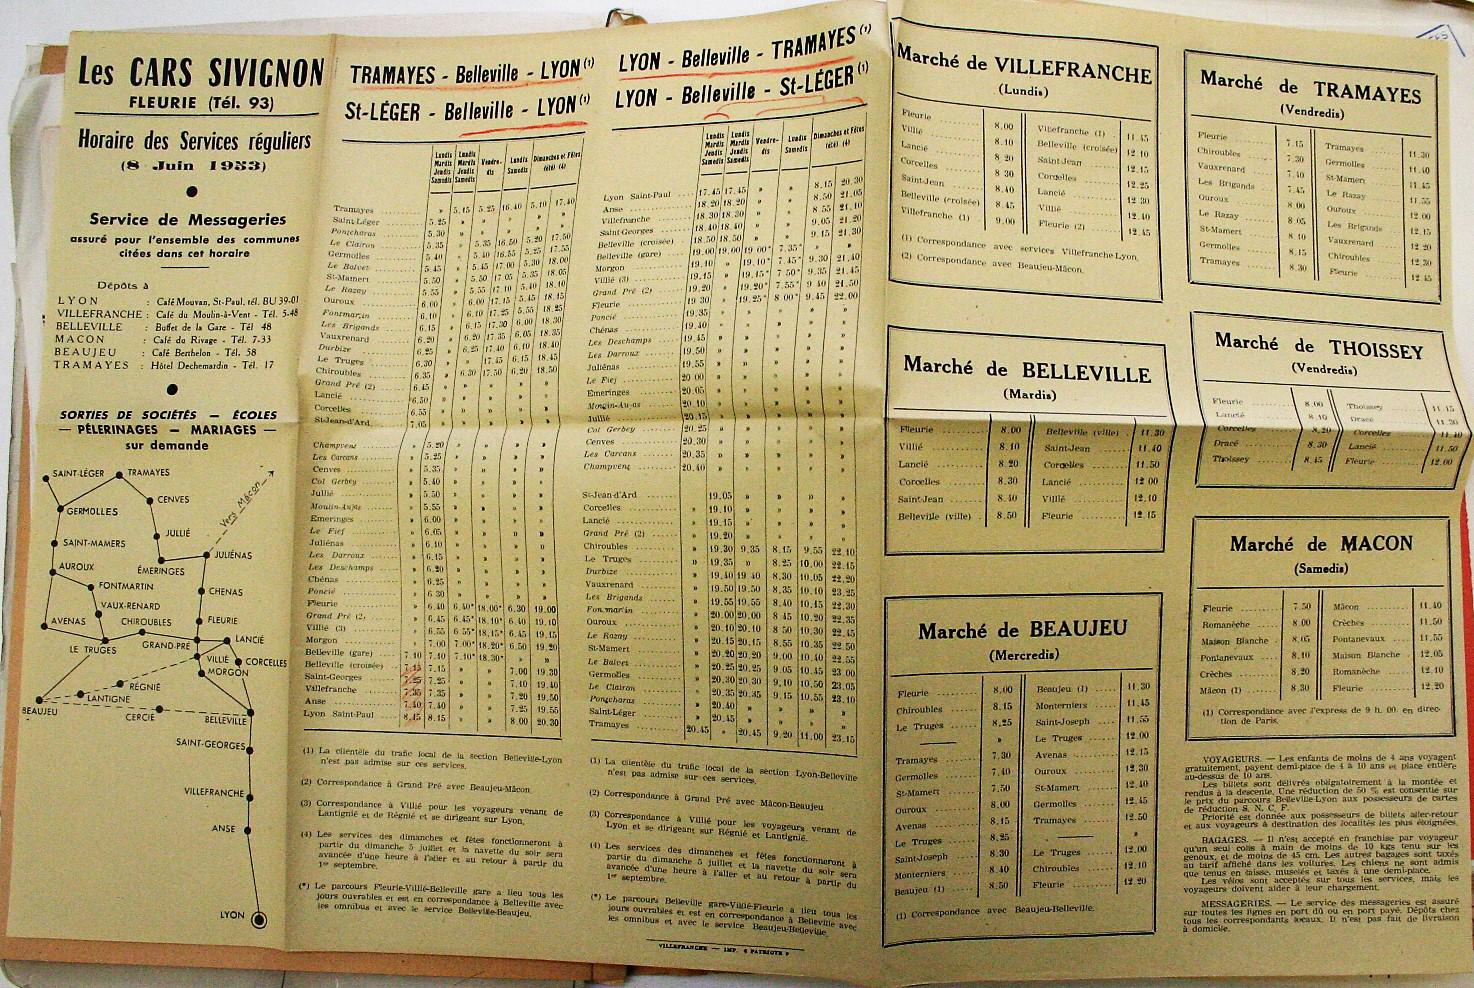 1953 route map and timetable